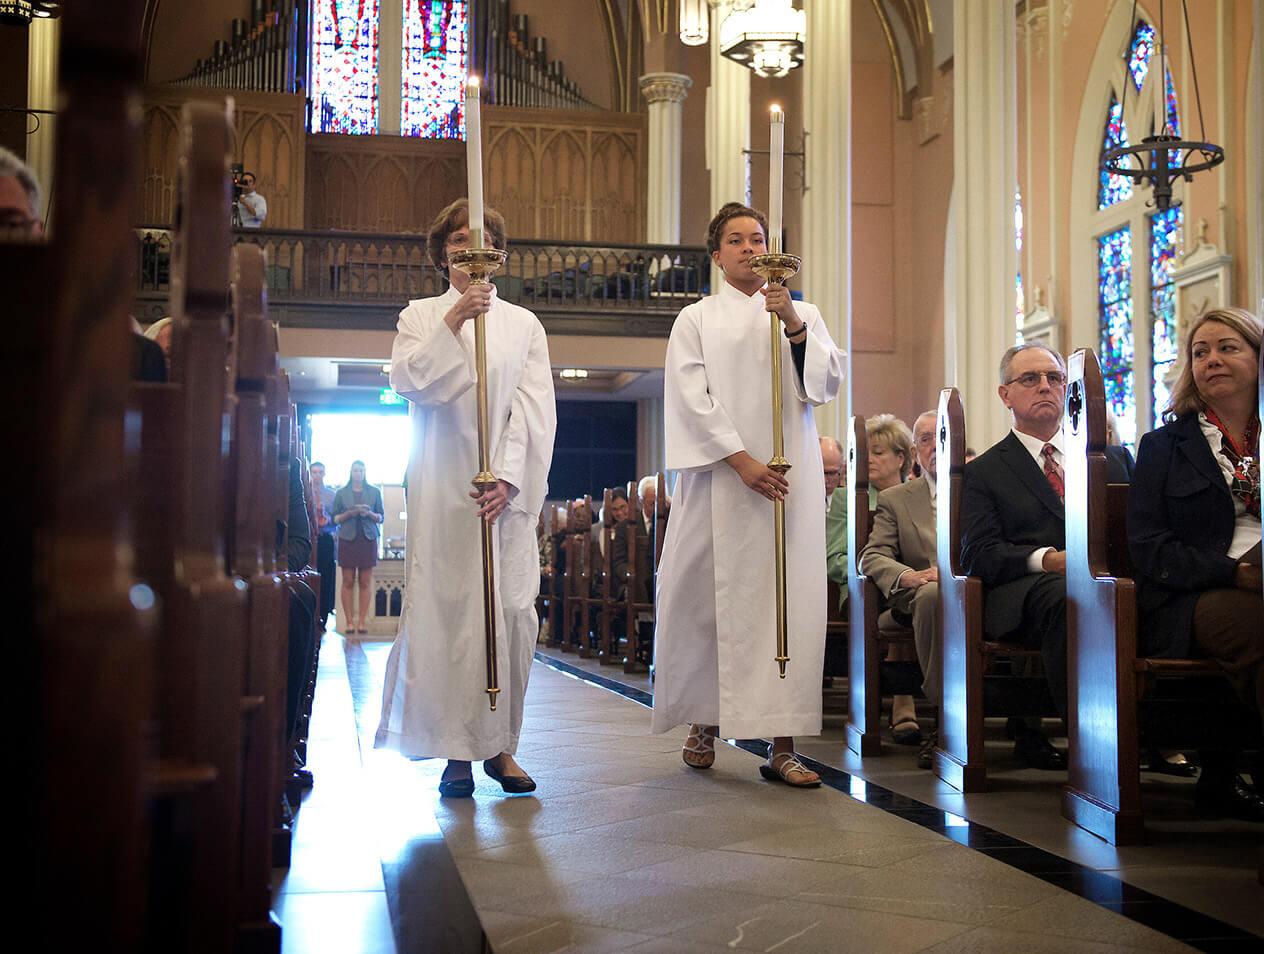 Candle bearers entering the church